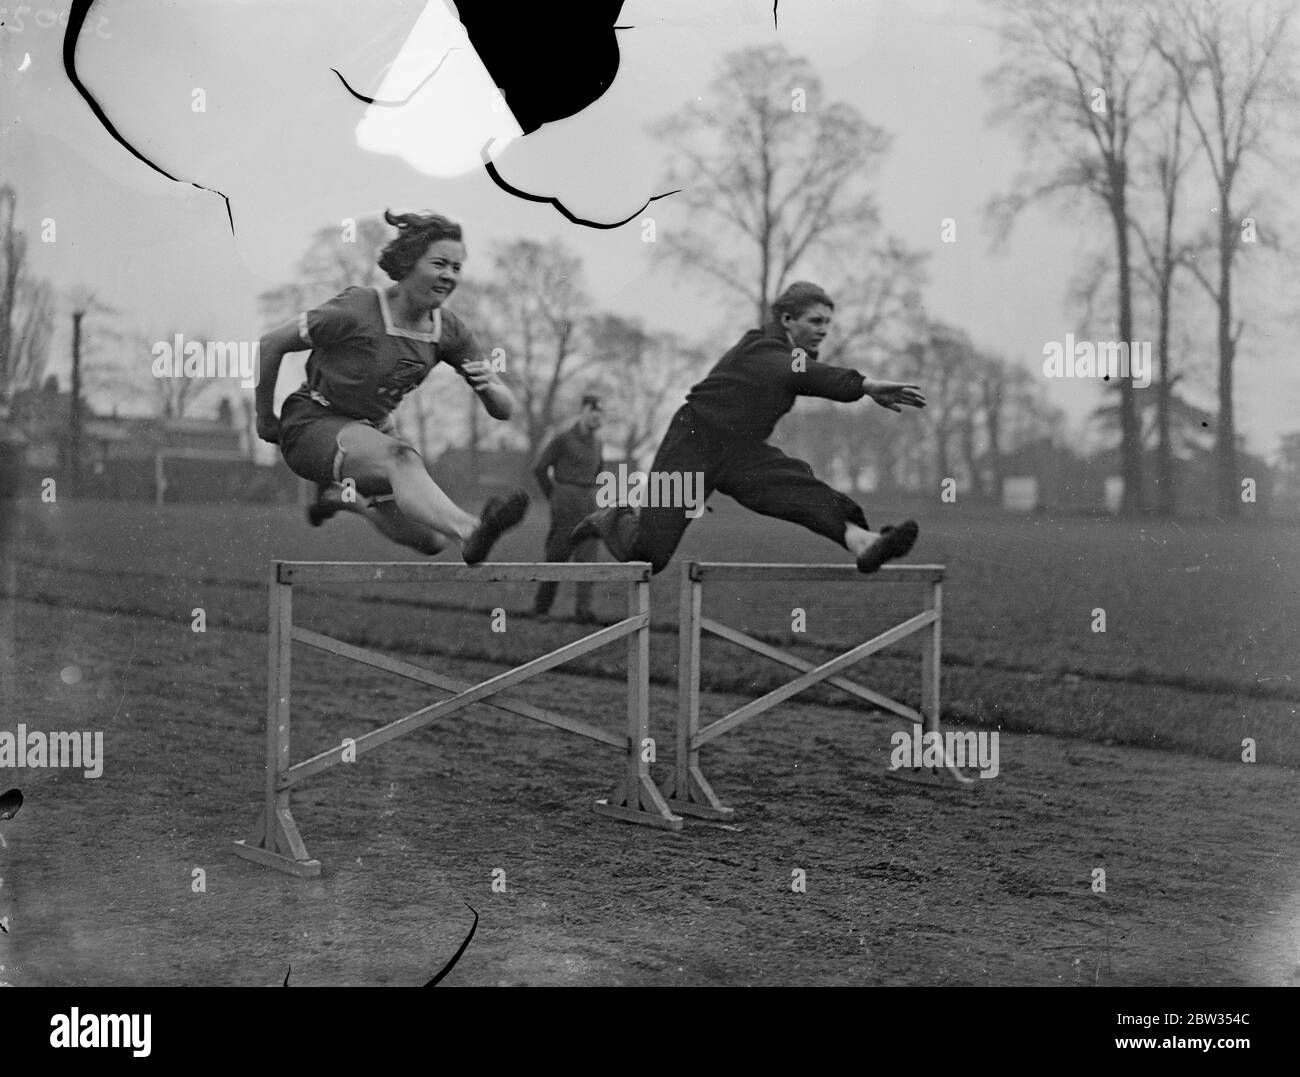 Champion woman hurdler practices at Mitcham . Miss Kathleen Tiffin , the champion woman hurdler , with Miss Beatrice Proctor , were out at Mitcham , Surrey , practicig for the coming summer championship . Miss Beatrice Proctor ( nearest camera ) and Miss Kathleen Tiffin in fine action taking a hurdle while training at Mitcham , Surrey . 26 February 1933 Stock Photo